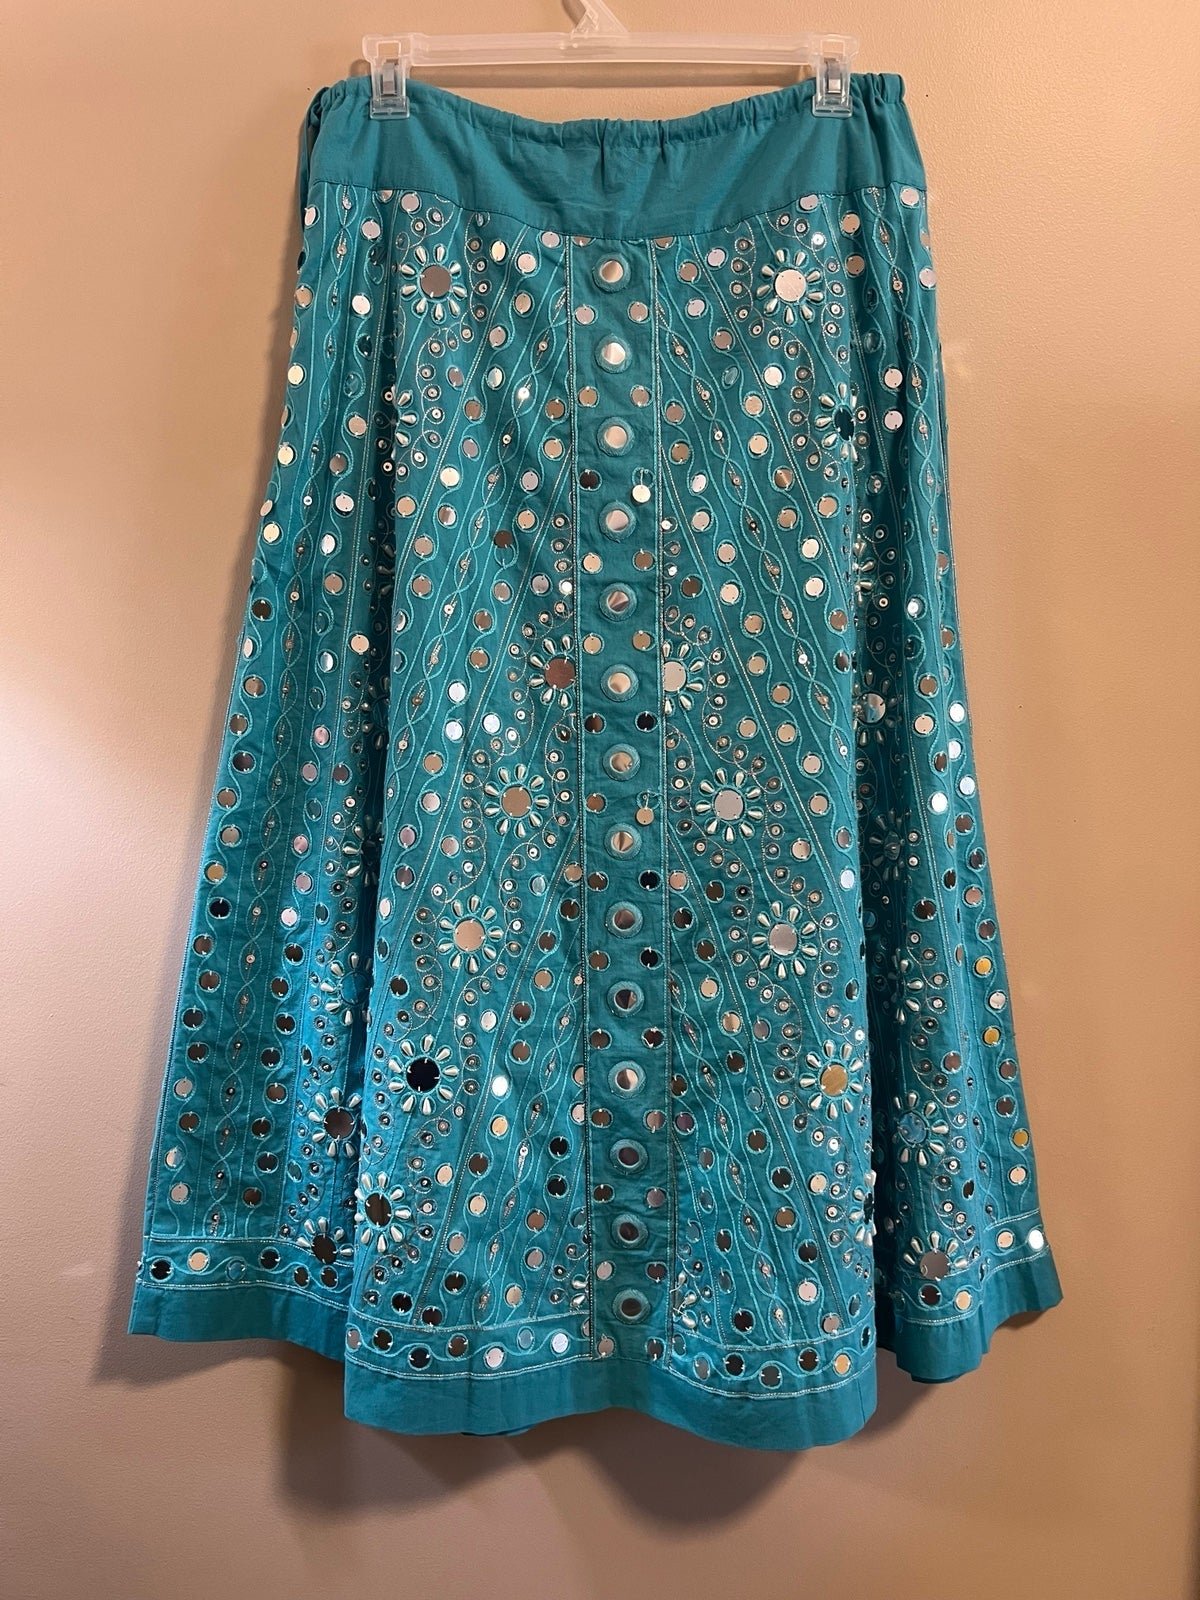 Popular Soft surroundings Preciosa Embroidered Turquoise Lined maxi skirt Size L NXwpowxZw Cool